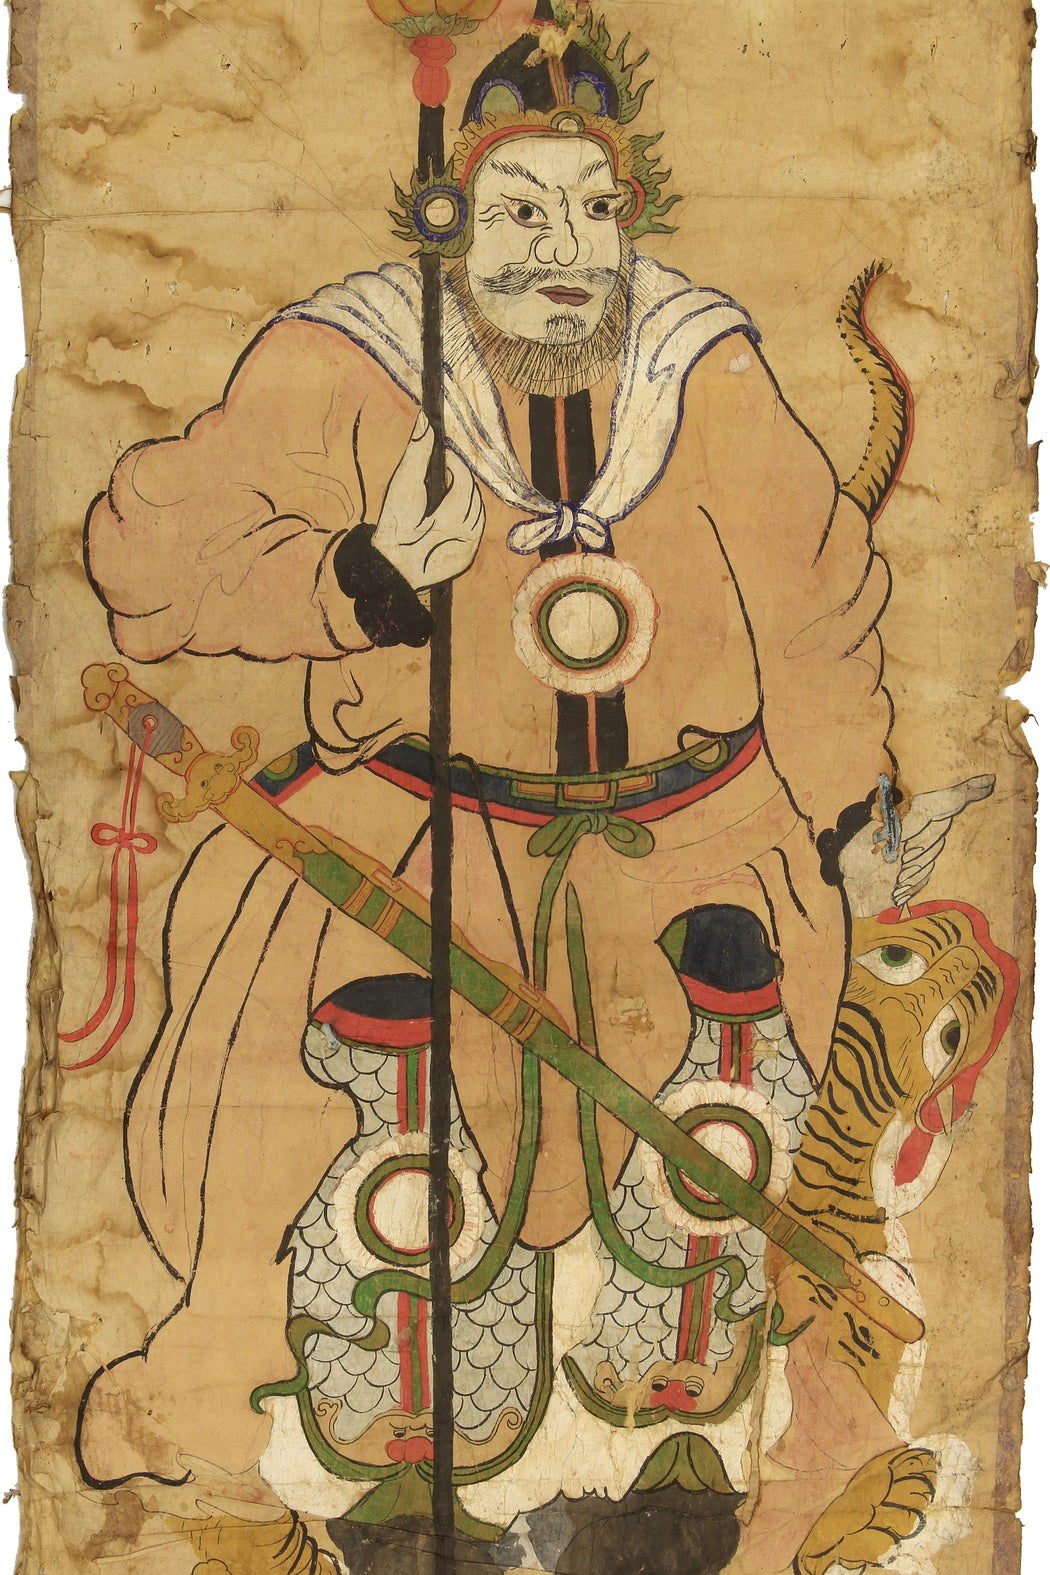 Yao (Mein) Antique Shaman Ceremonial Painting | 48" - Niger Bend